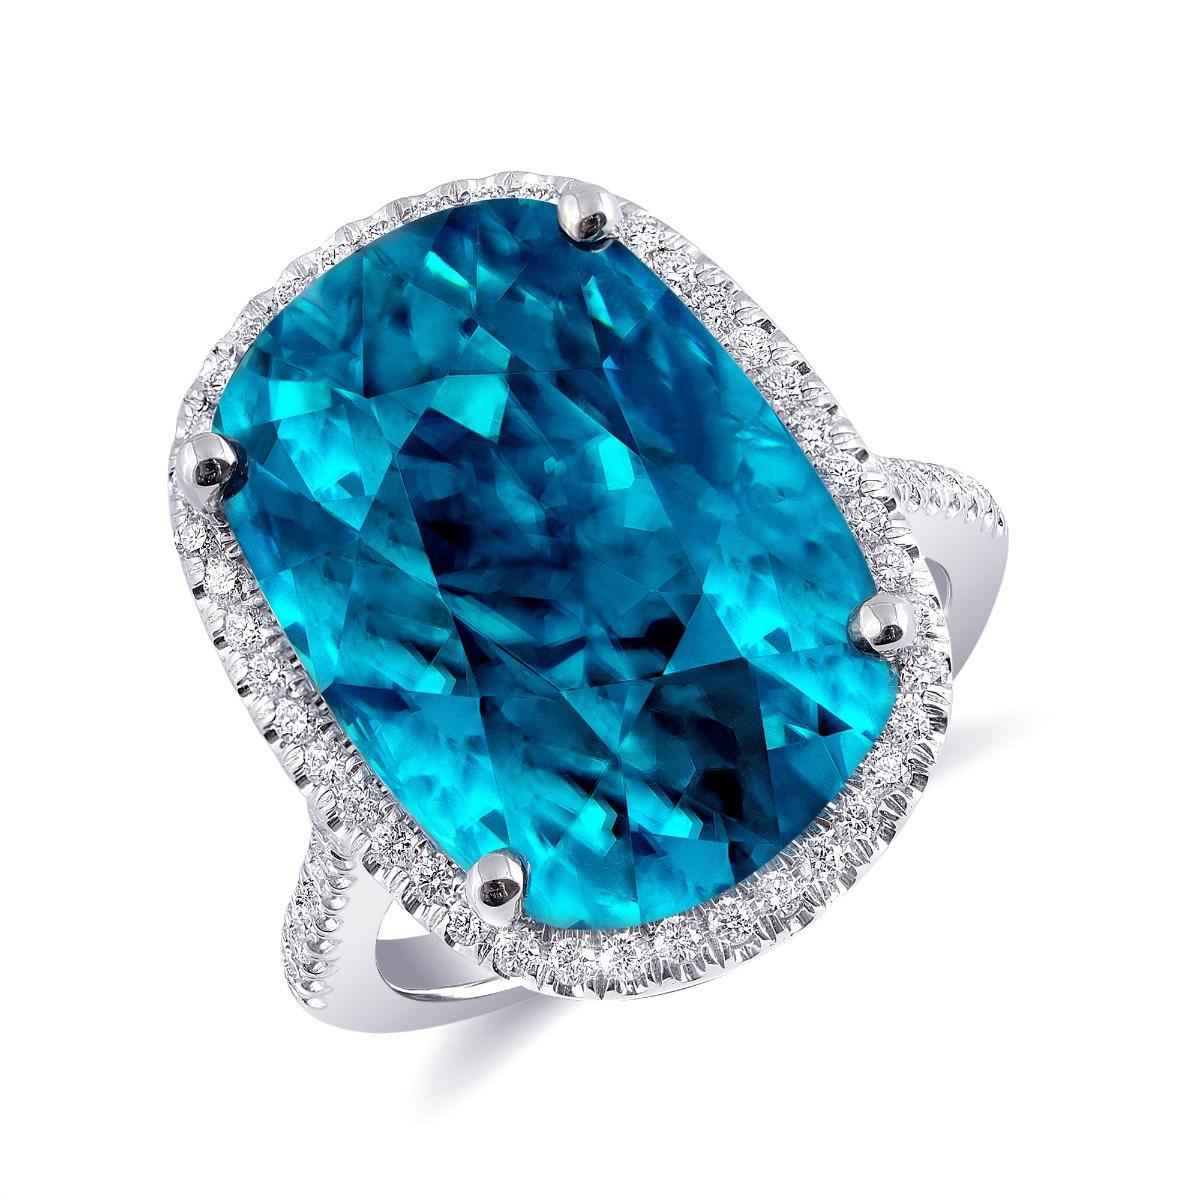 26.88 Carats Blue Zircon Diamonds set in 14K White Gold Ring In New Condition For Sale In Los Angeles, CA